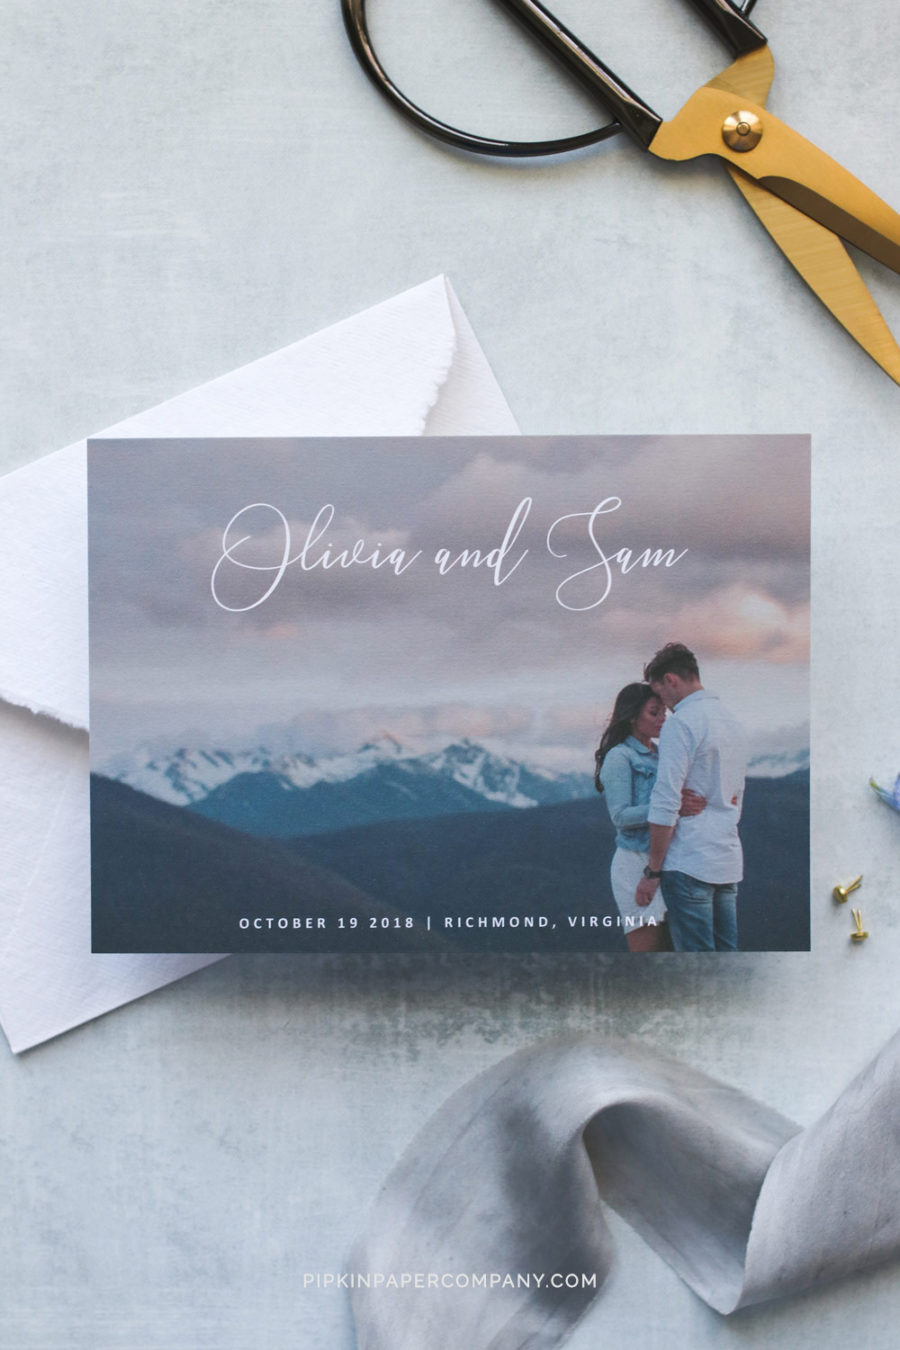 Are save the dates really necessary?